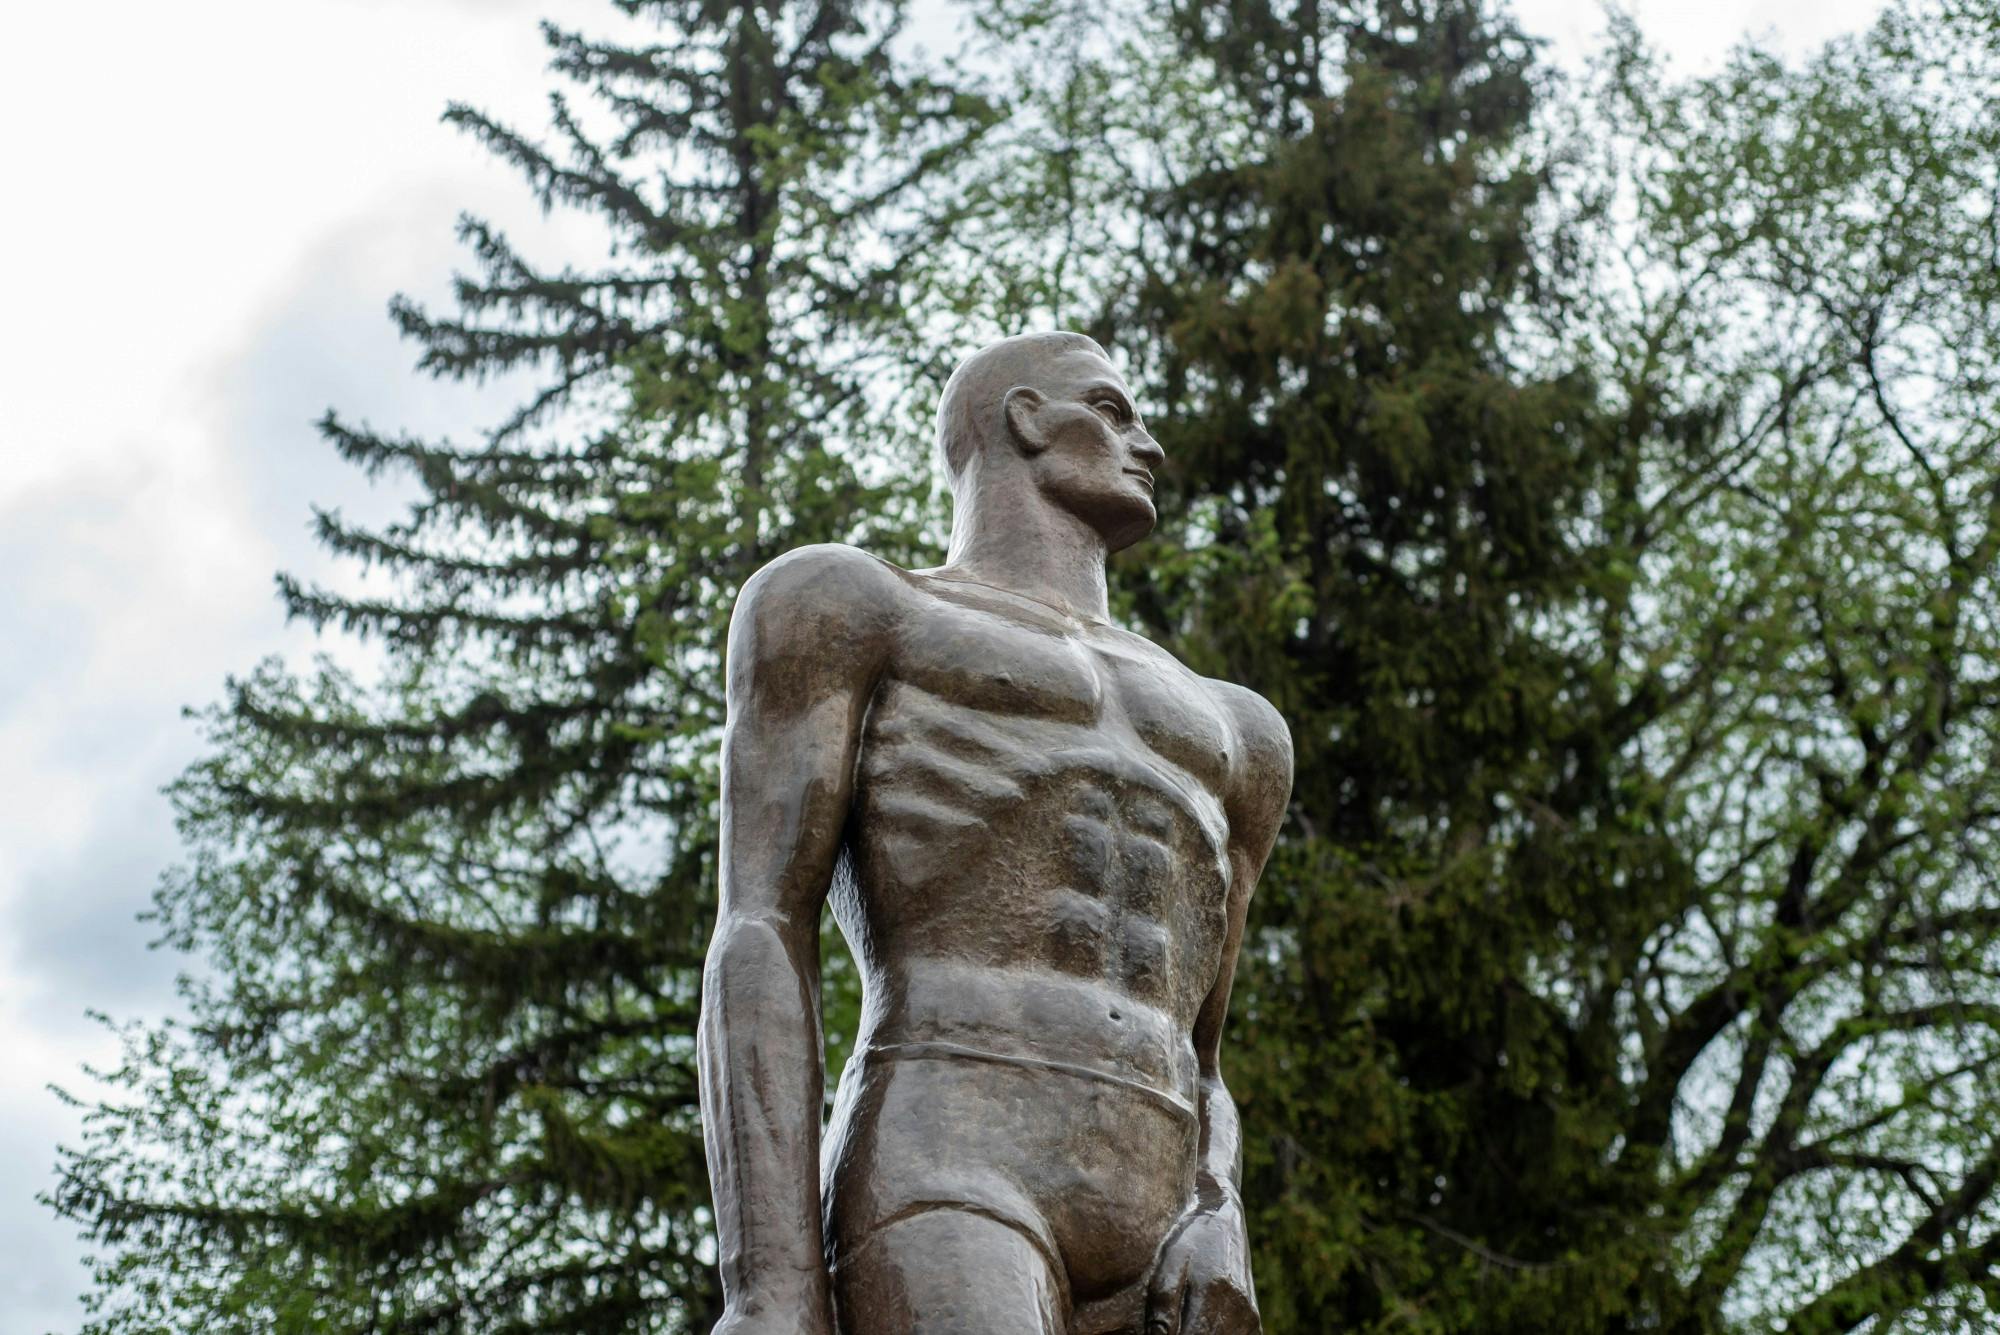 The Sparty Statue on March 19, 2020